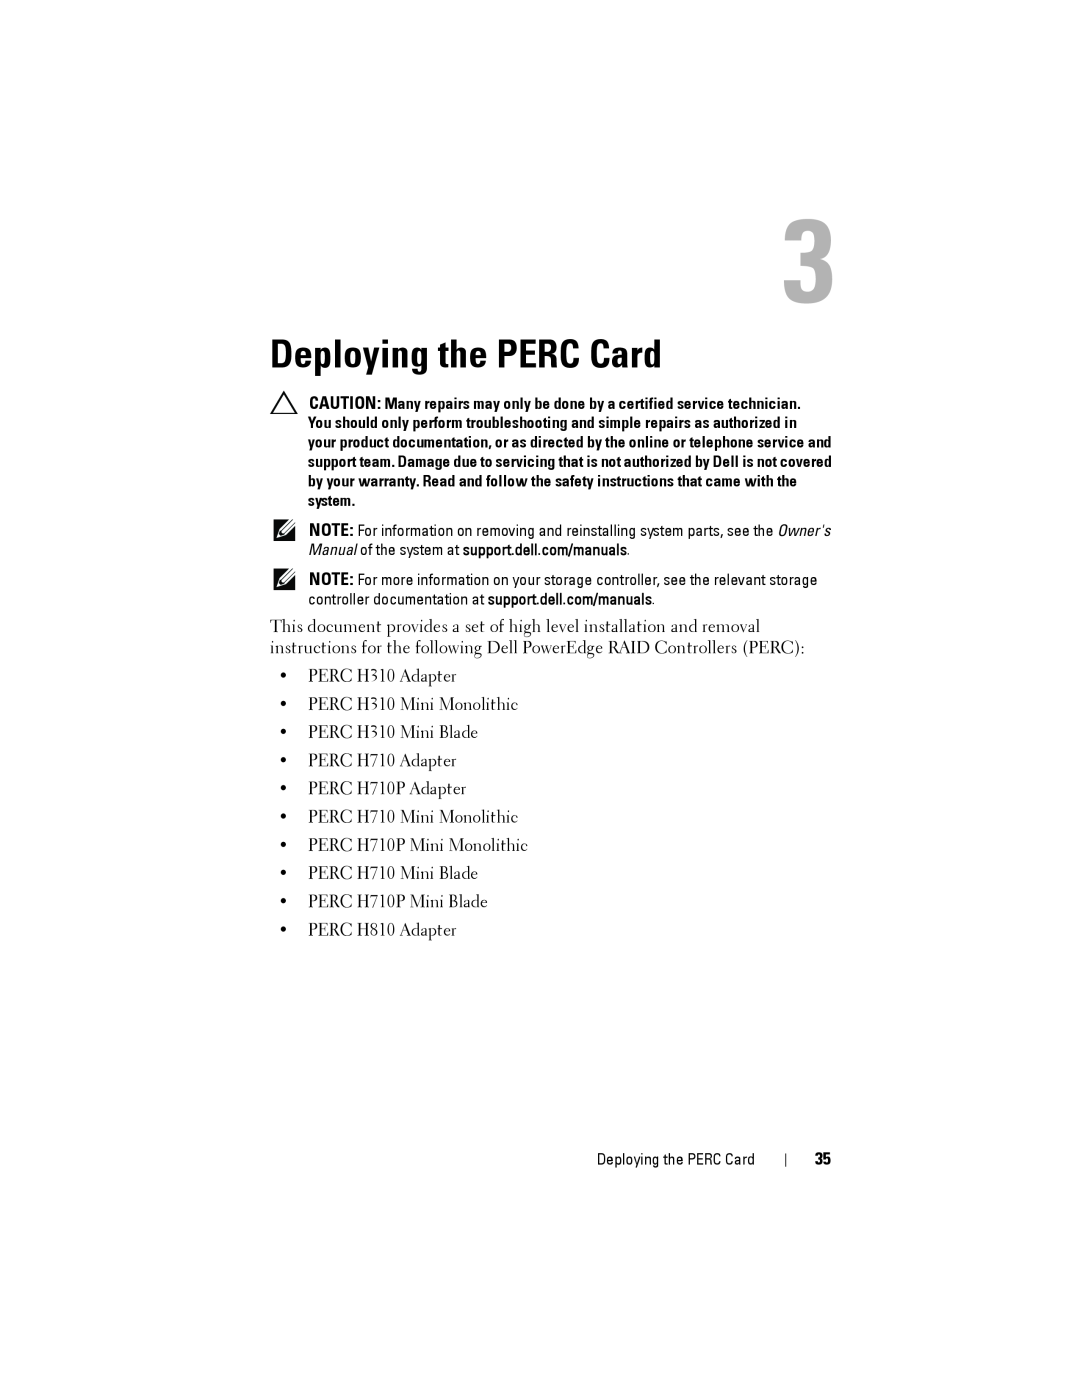 Dell H810, H710P, H310 manual Deploying the PERC Card 